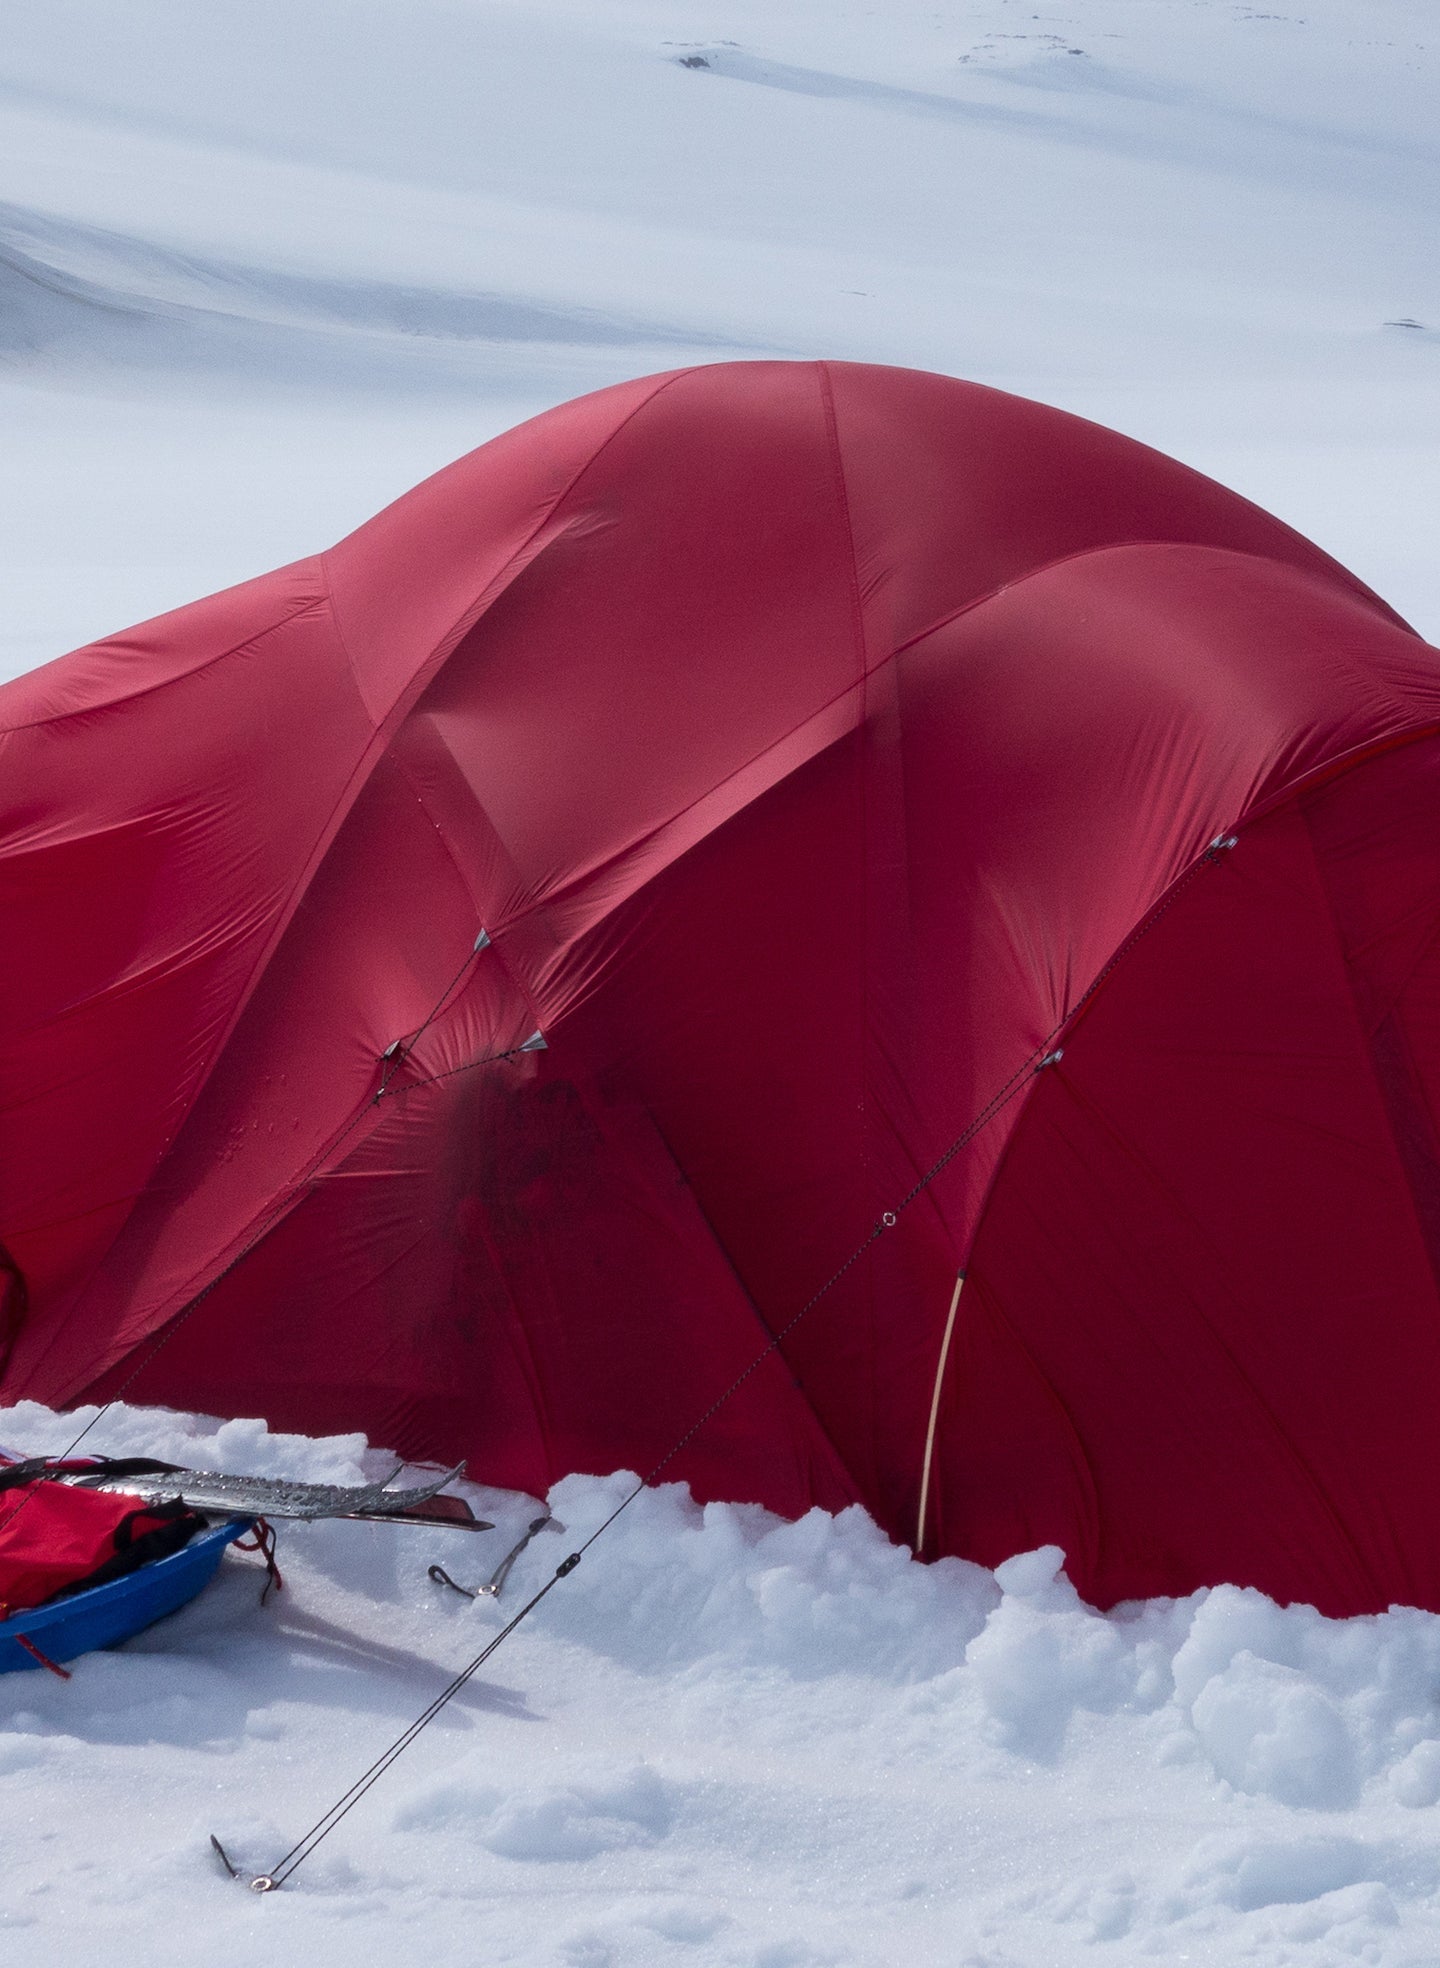 5 Tips for Staying Warm While Winter Backpacking/Camping